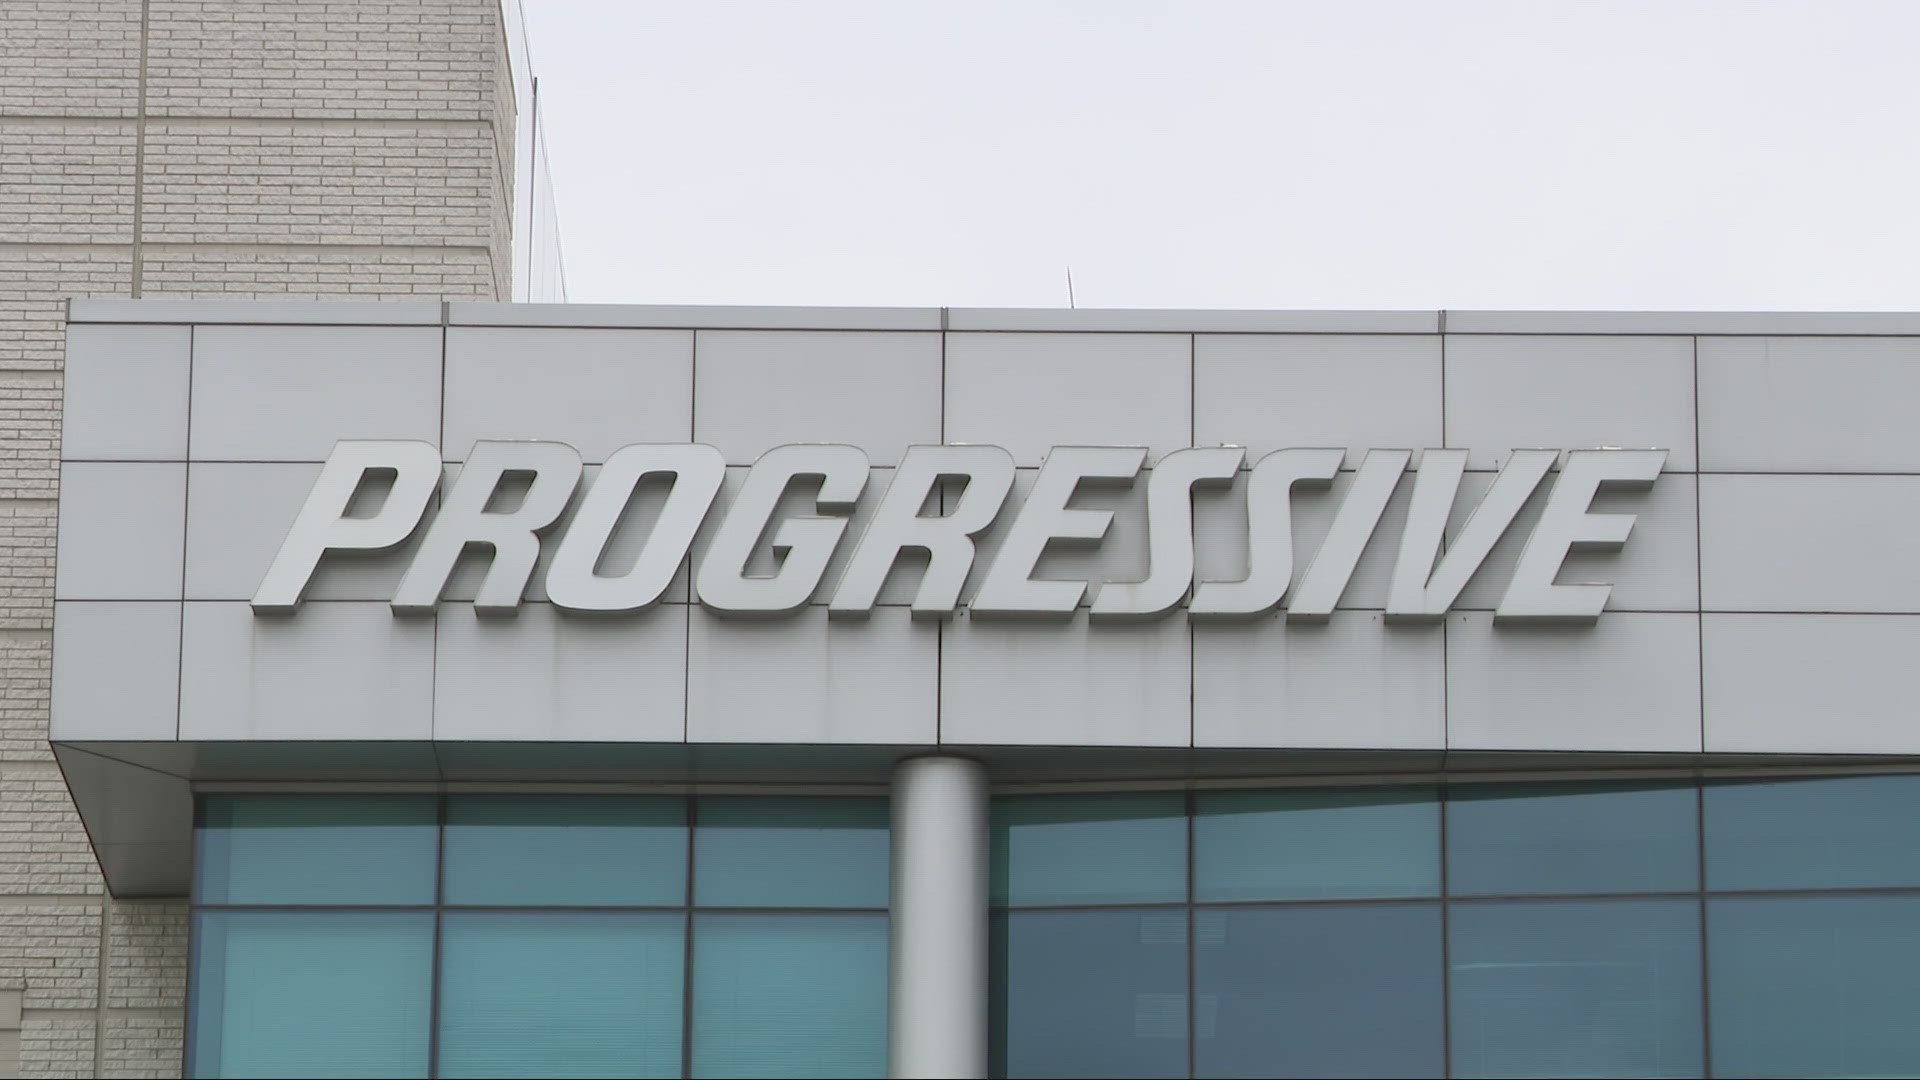 According to a spokesperson from Progressive, its campus on North Commons Boulevard in Mayfield will become the company's corporate headquarters.